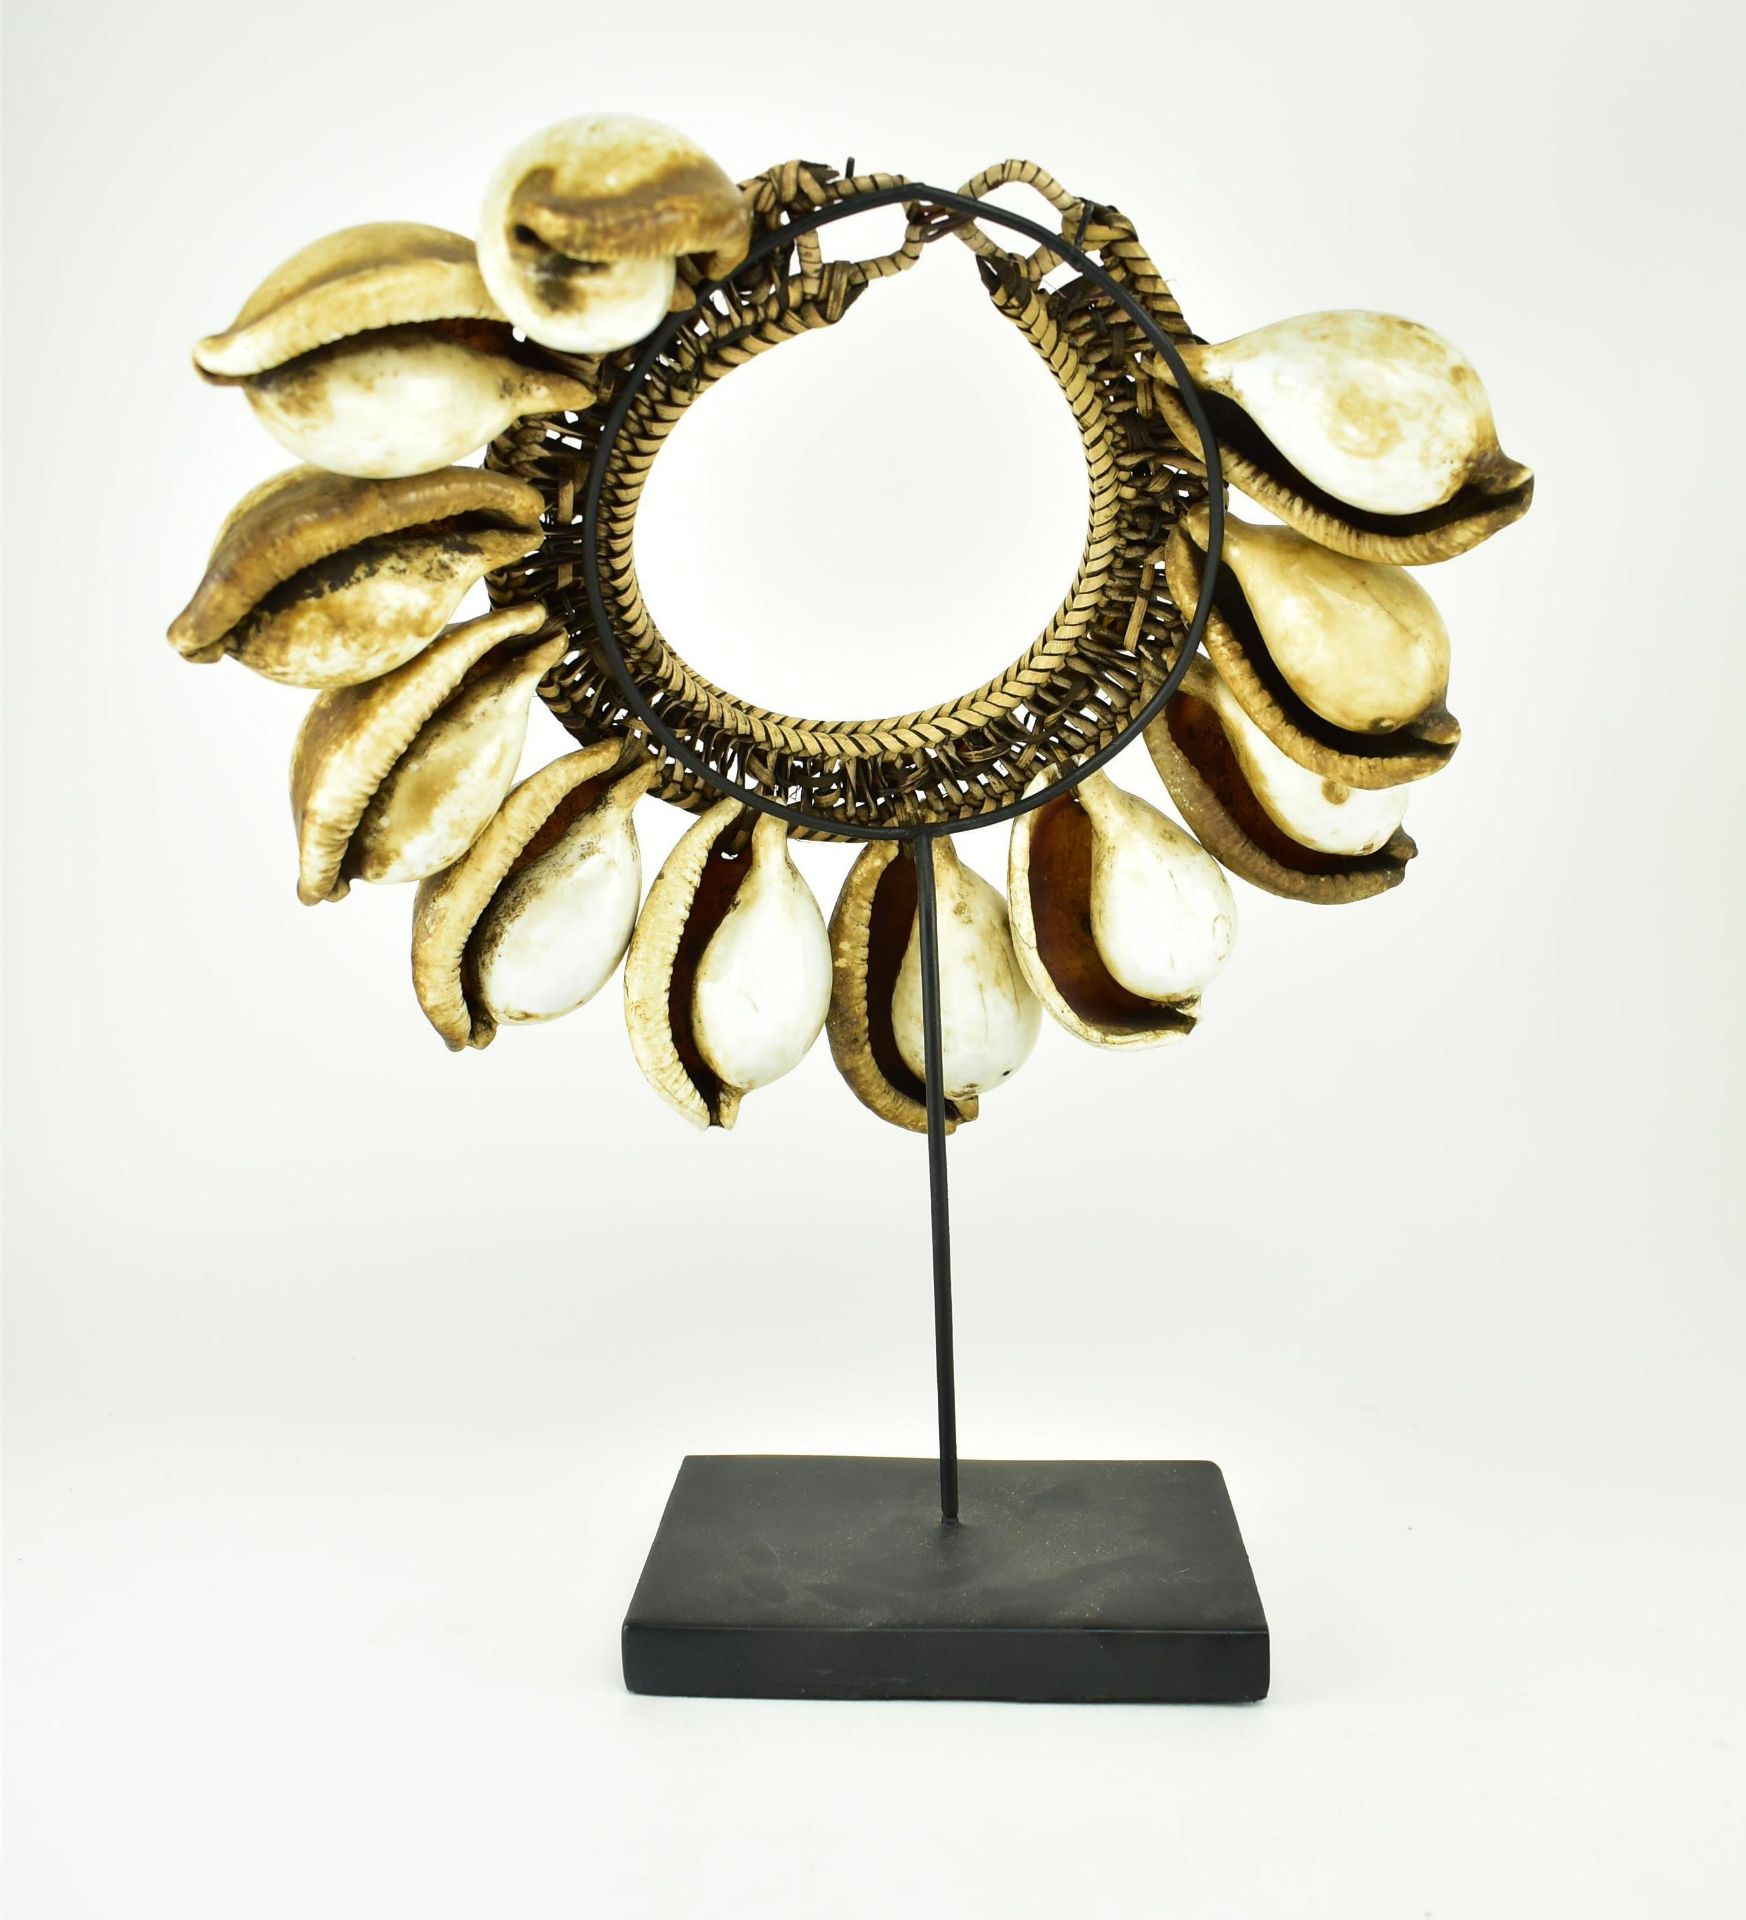 TWO ROCHE BOBOIS NATURAL SHELL NECKLACE ON STAND - Image 4 of 6